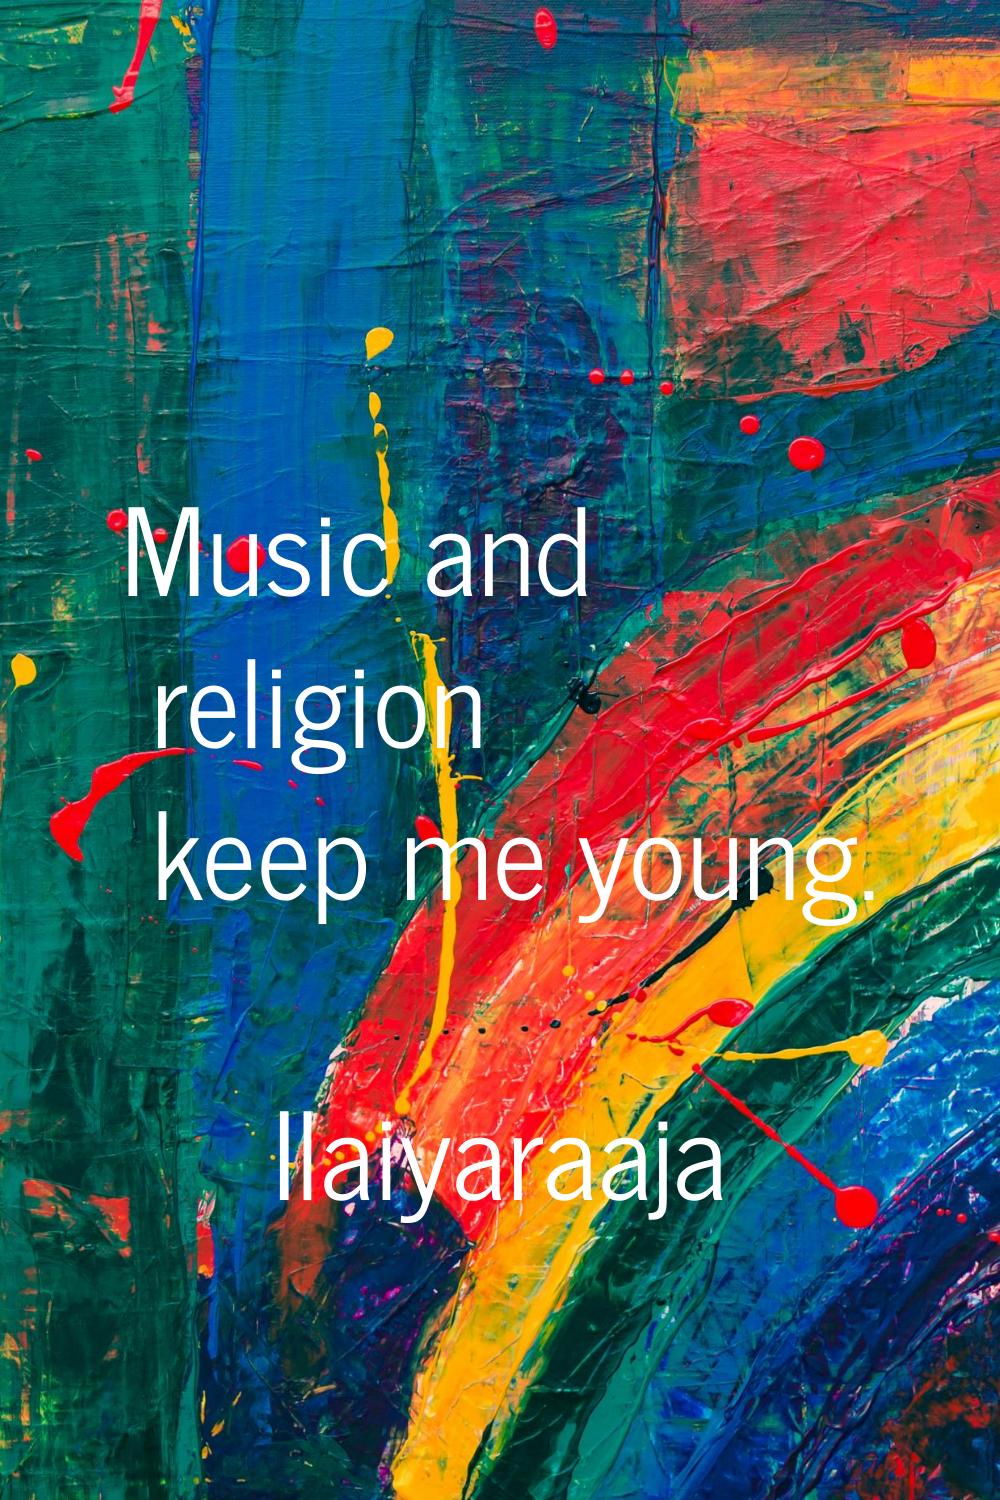 Music and religion keep me young.